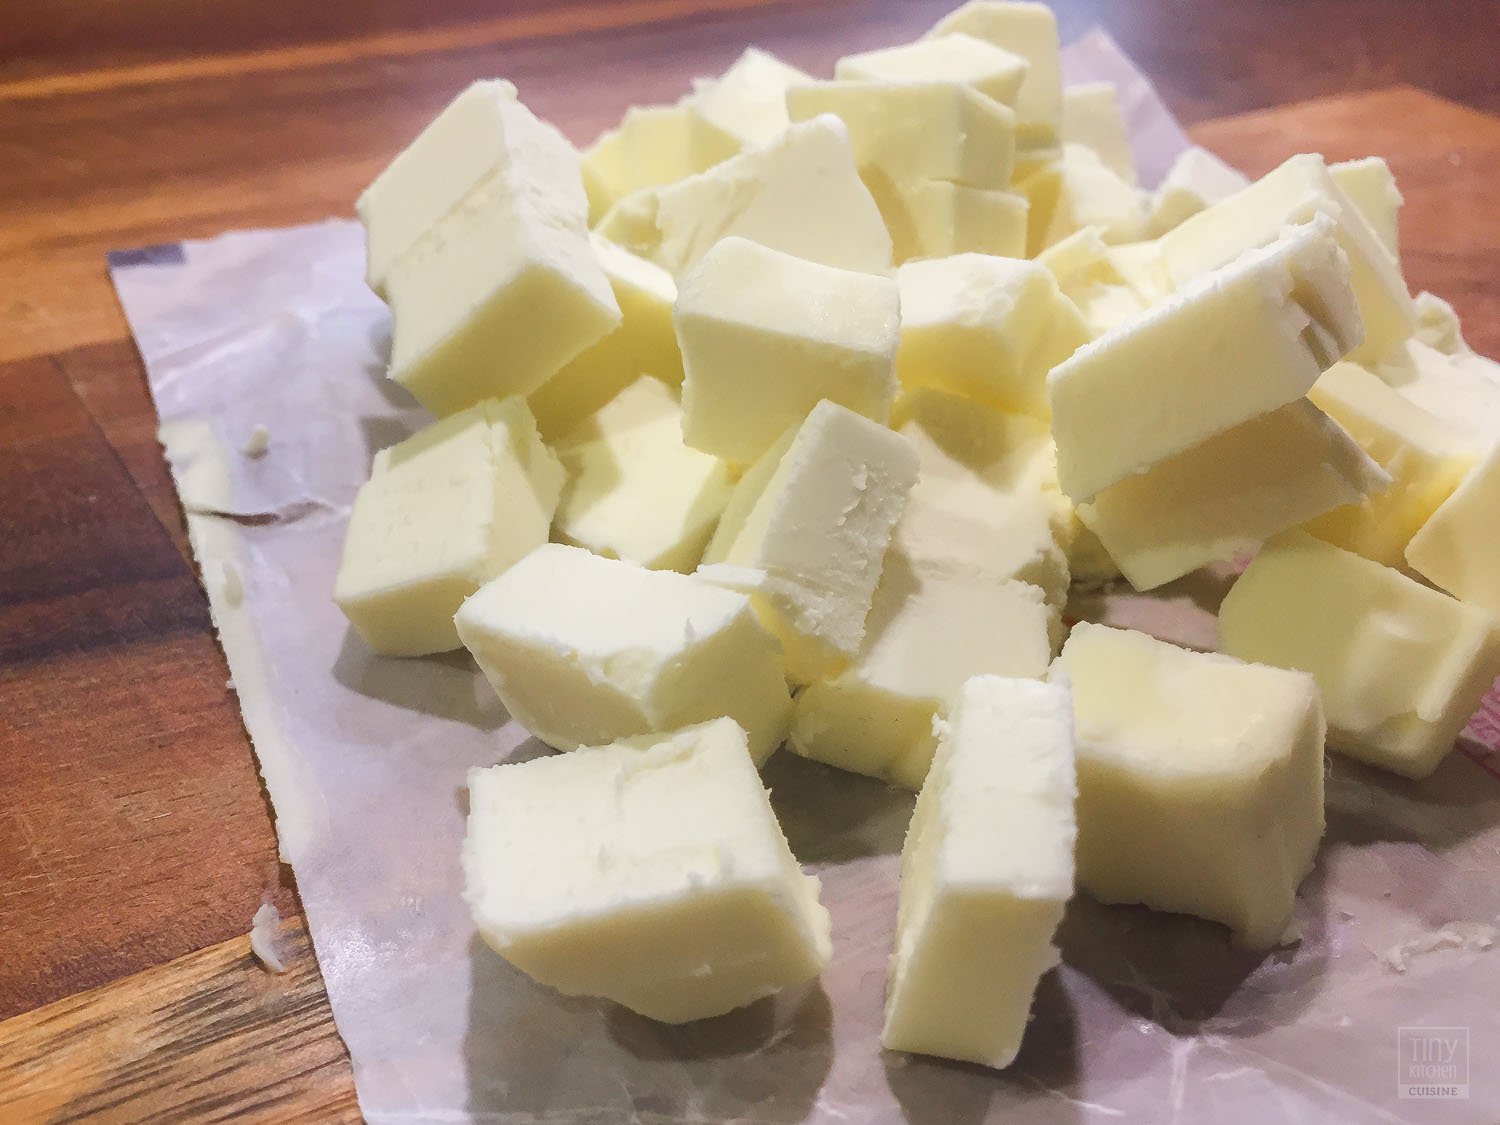 When making all-butter pie crust, cut your butter up in advance. This helps get the butter integrated without overworking it in your flour. | Tiny Kitchen Cuisine | https://tiny.kitchen/